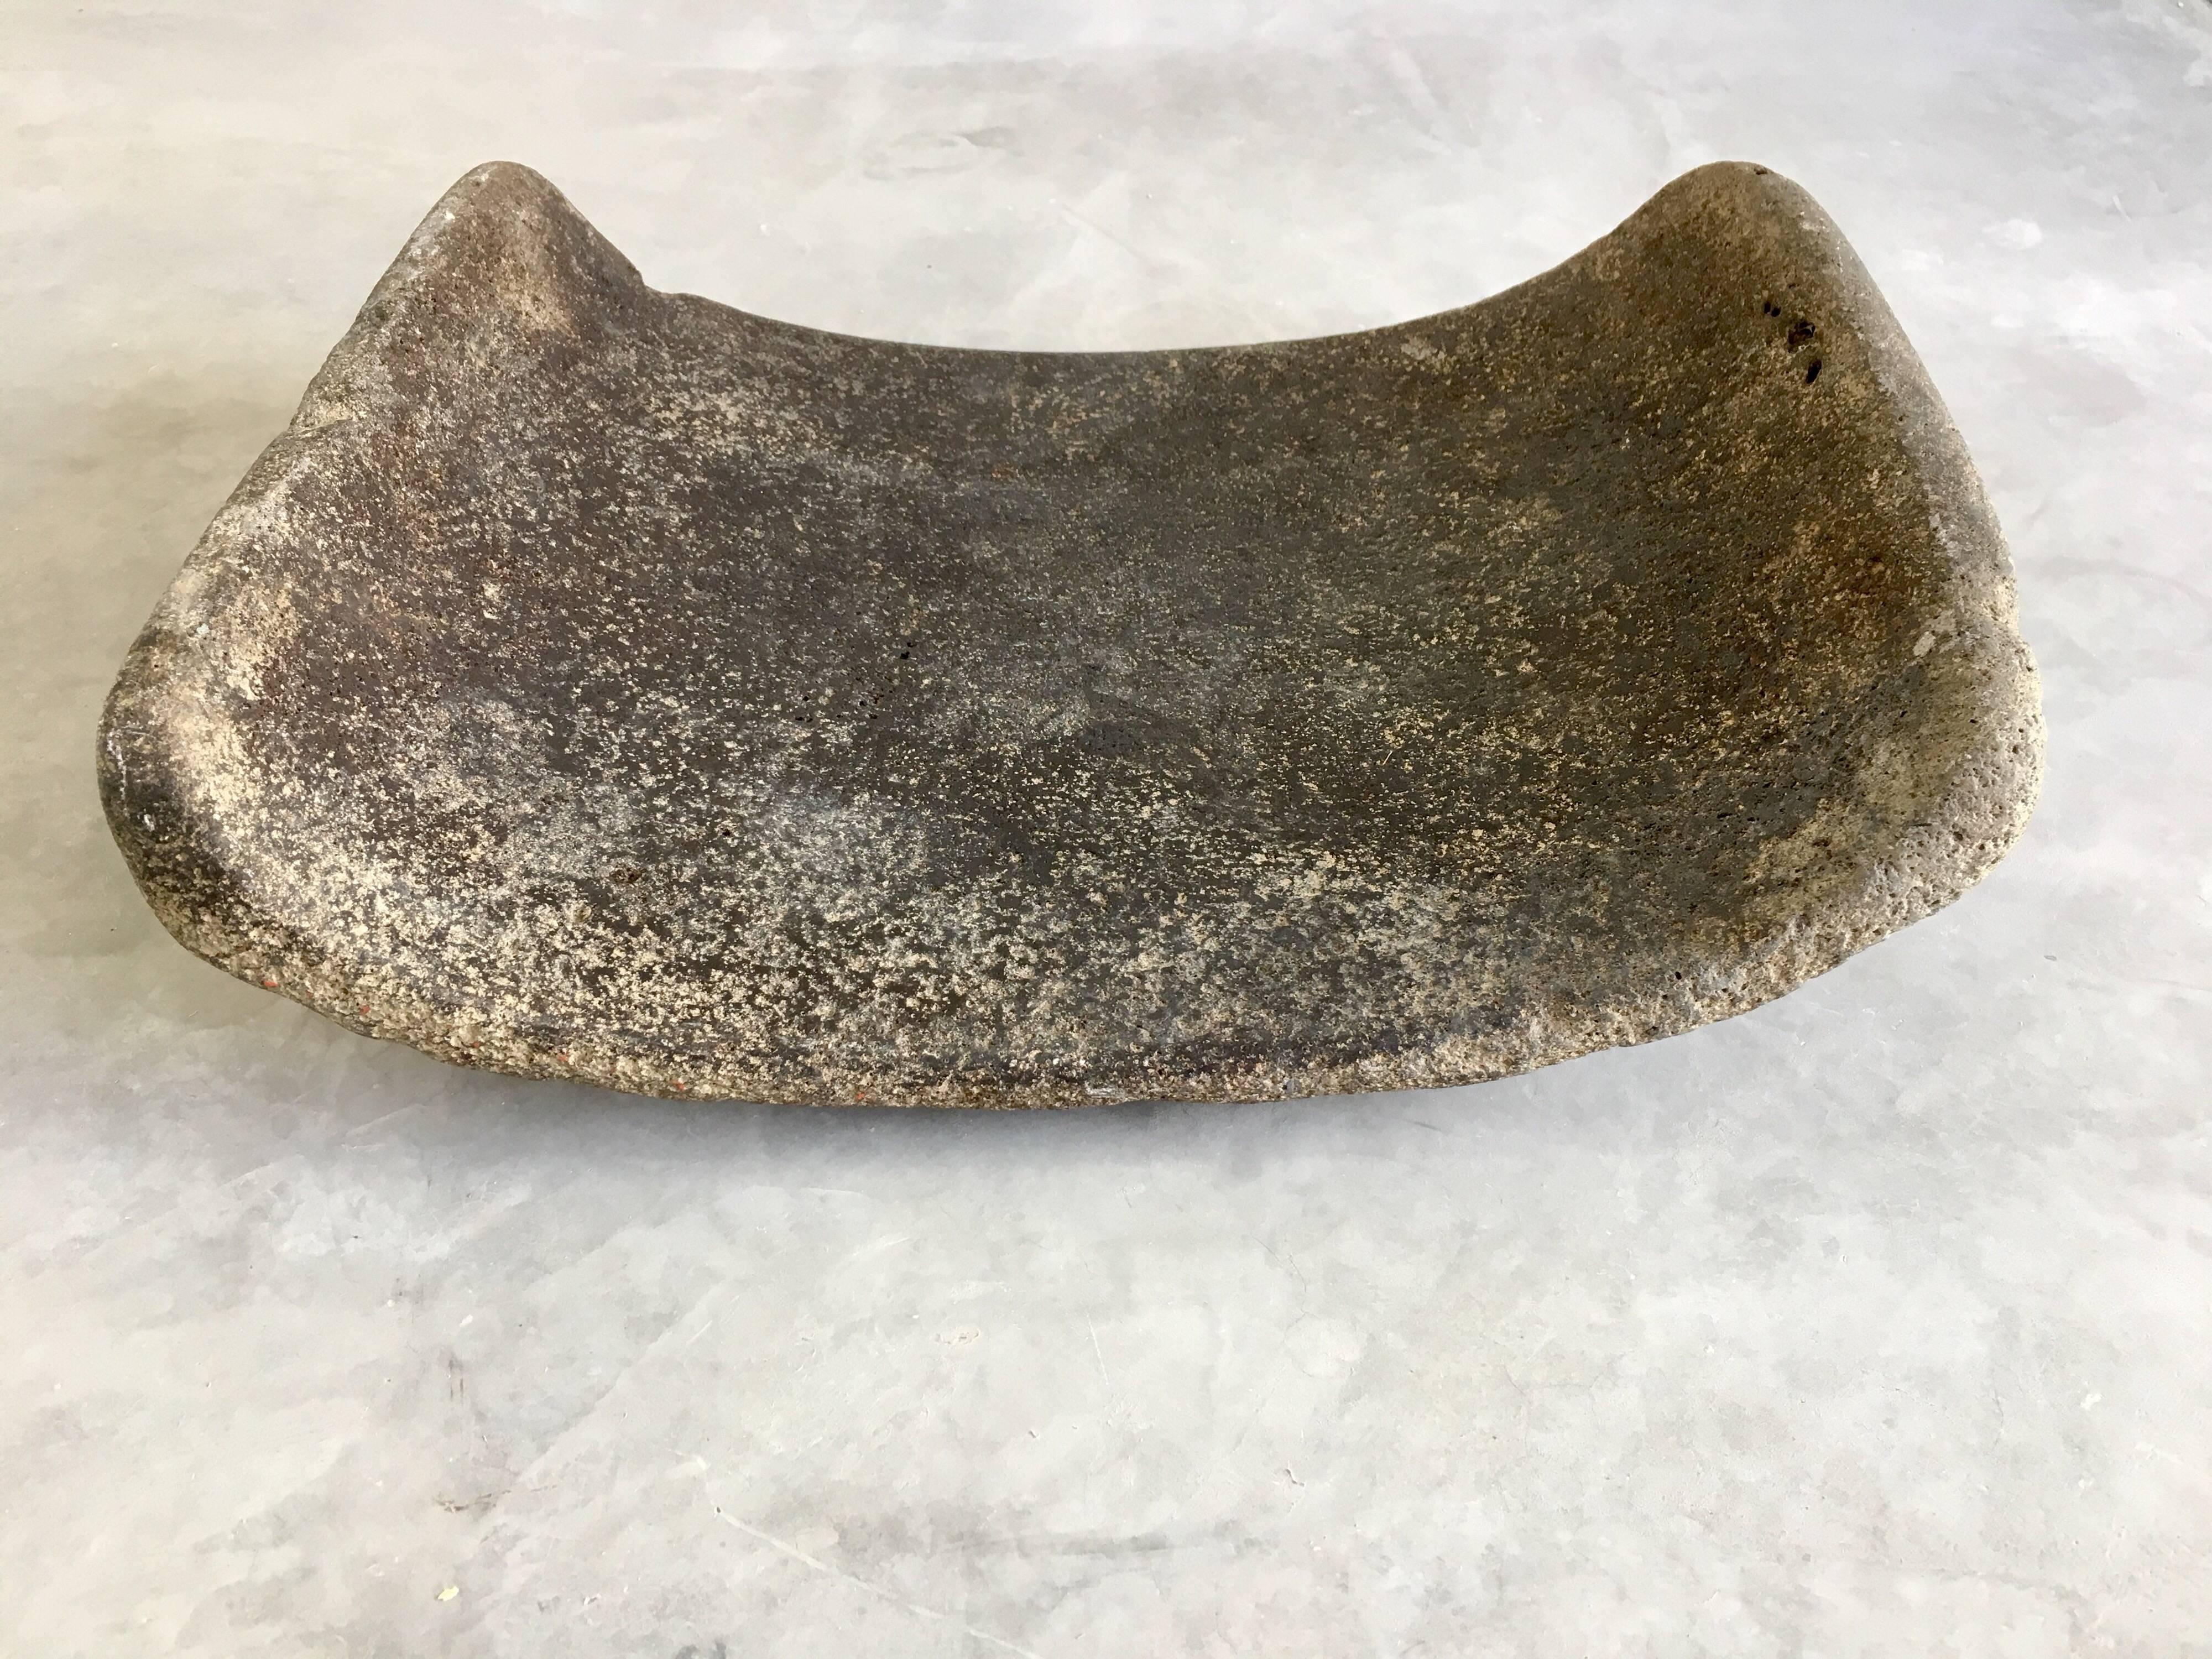 Mexican Antique Stone Mortar from Central Mexico